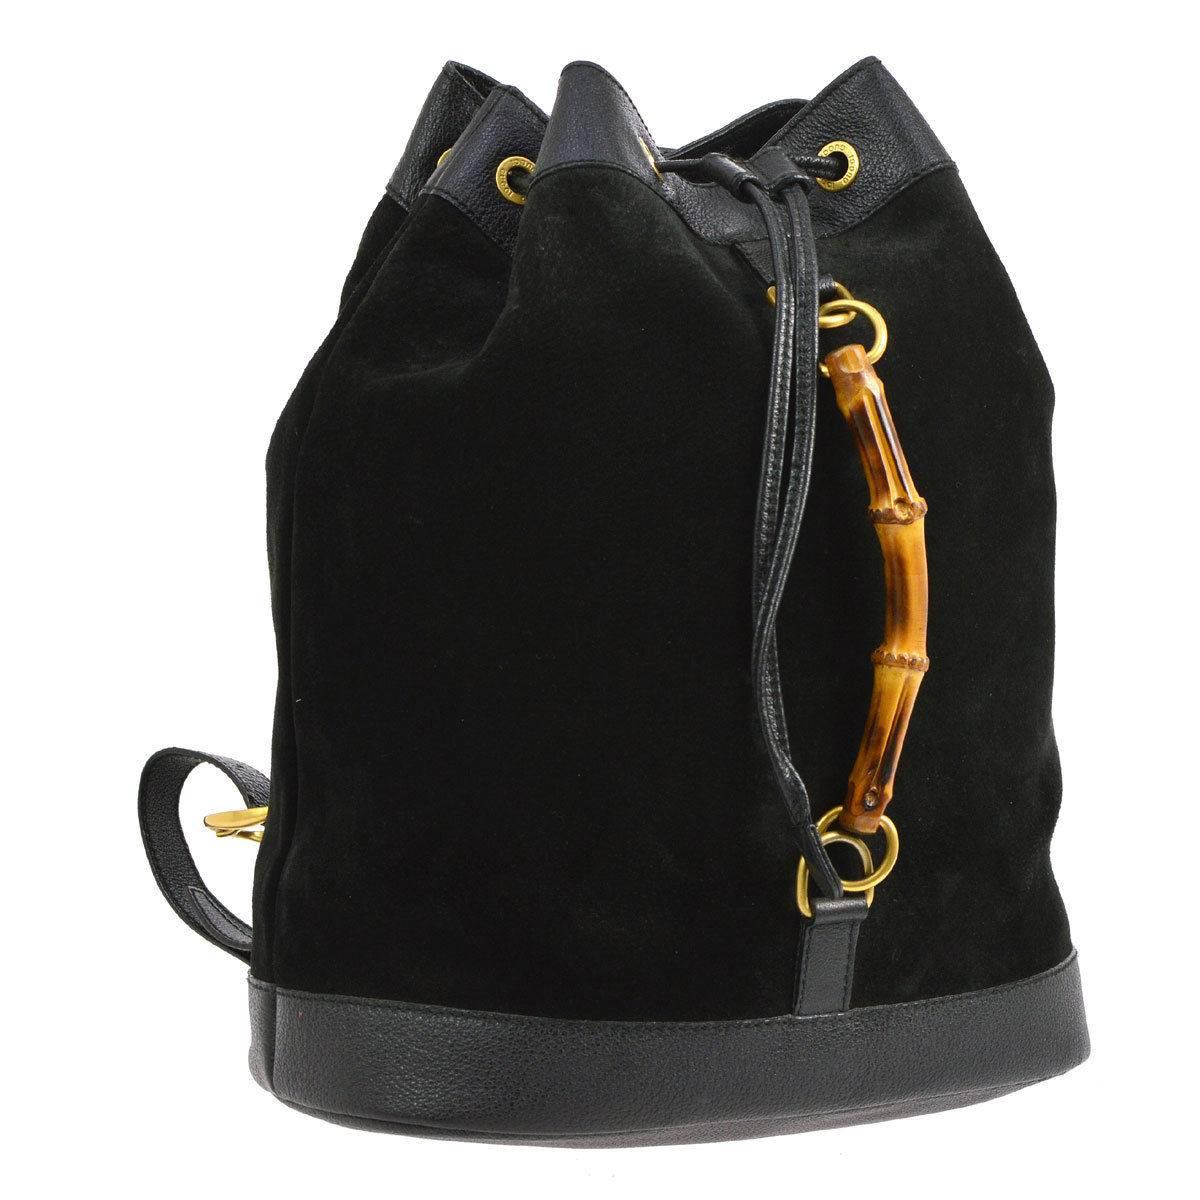 Gucci Black Suede Leather Bamboo 2 in 1 Top Handle Drawstring Backpack Bag